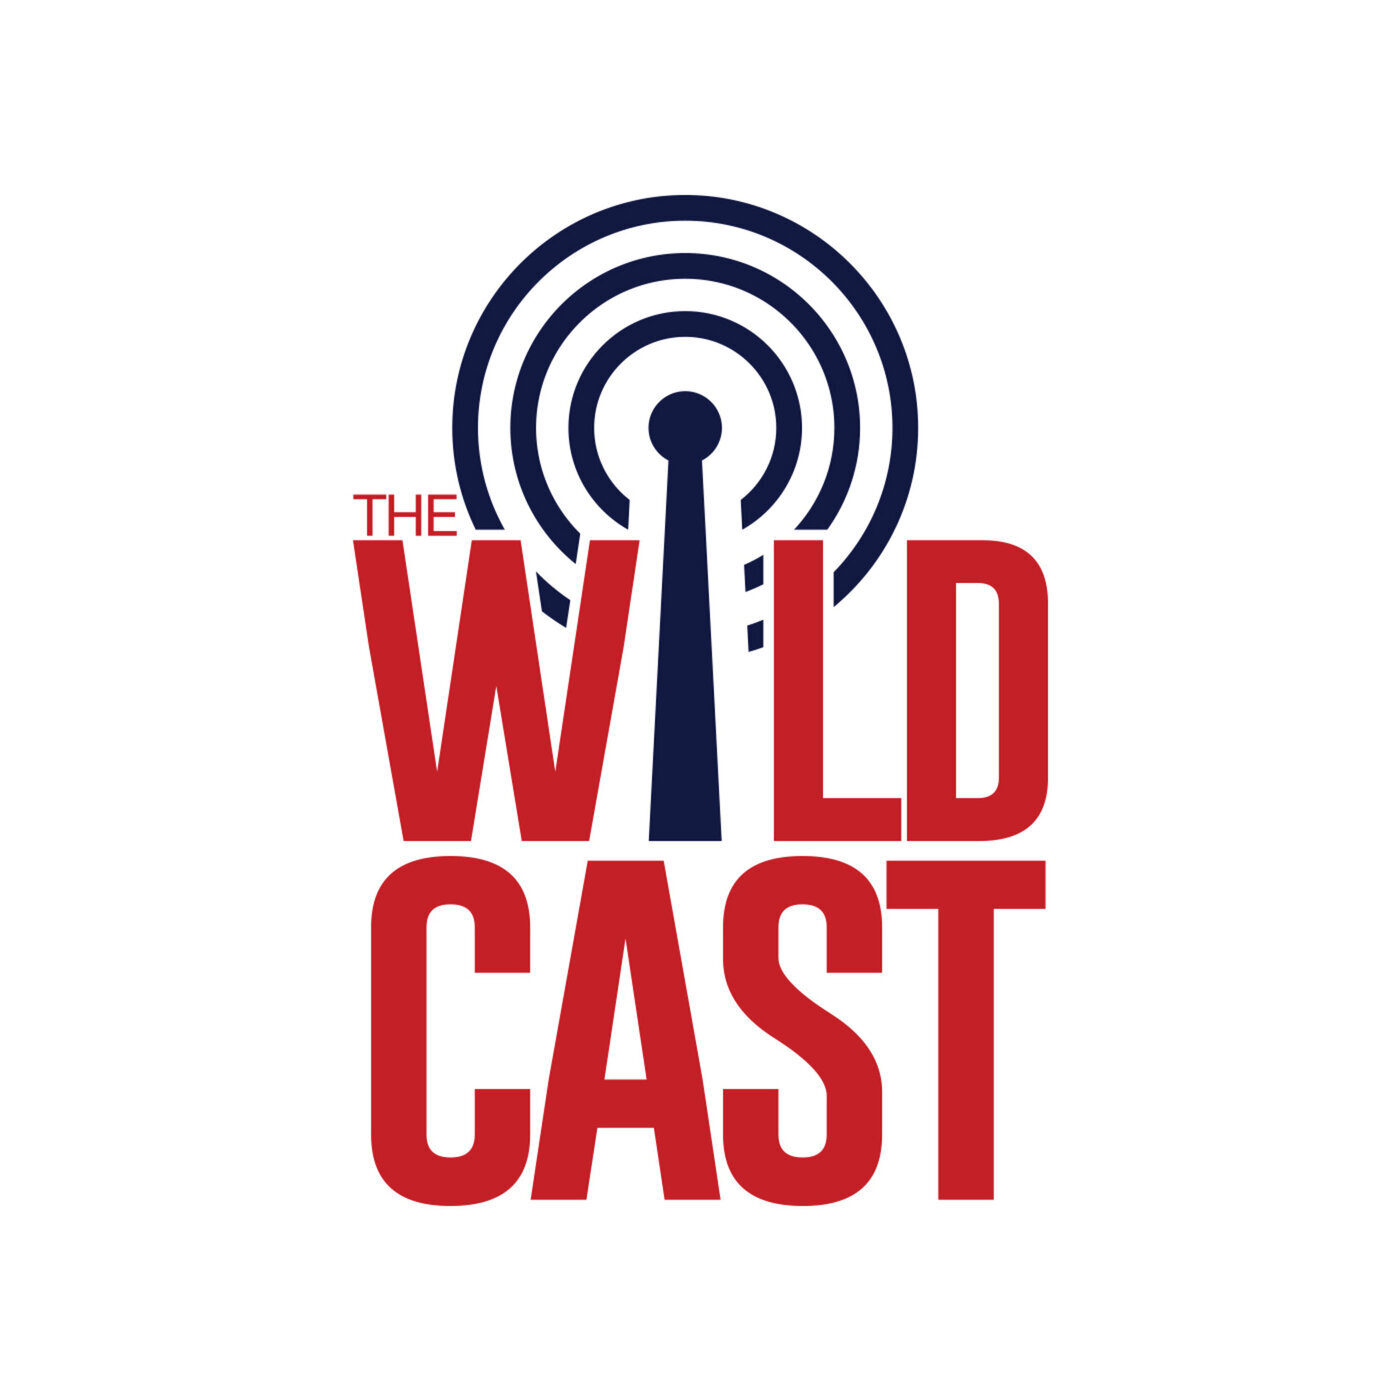 The Wildcast, Episode 457: A conversation with AHL All-Star goalie Matthew Villalta of the 1st place Tucson Roadrunners